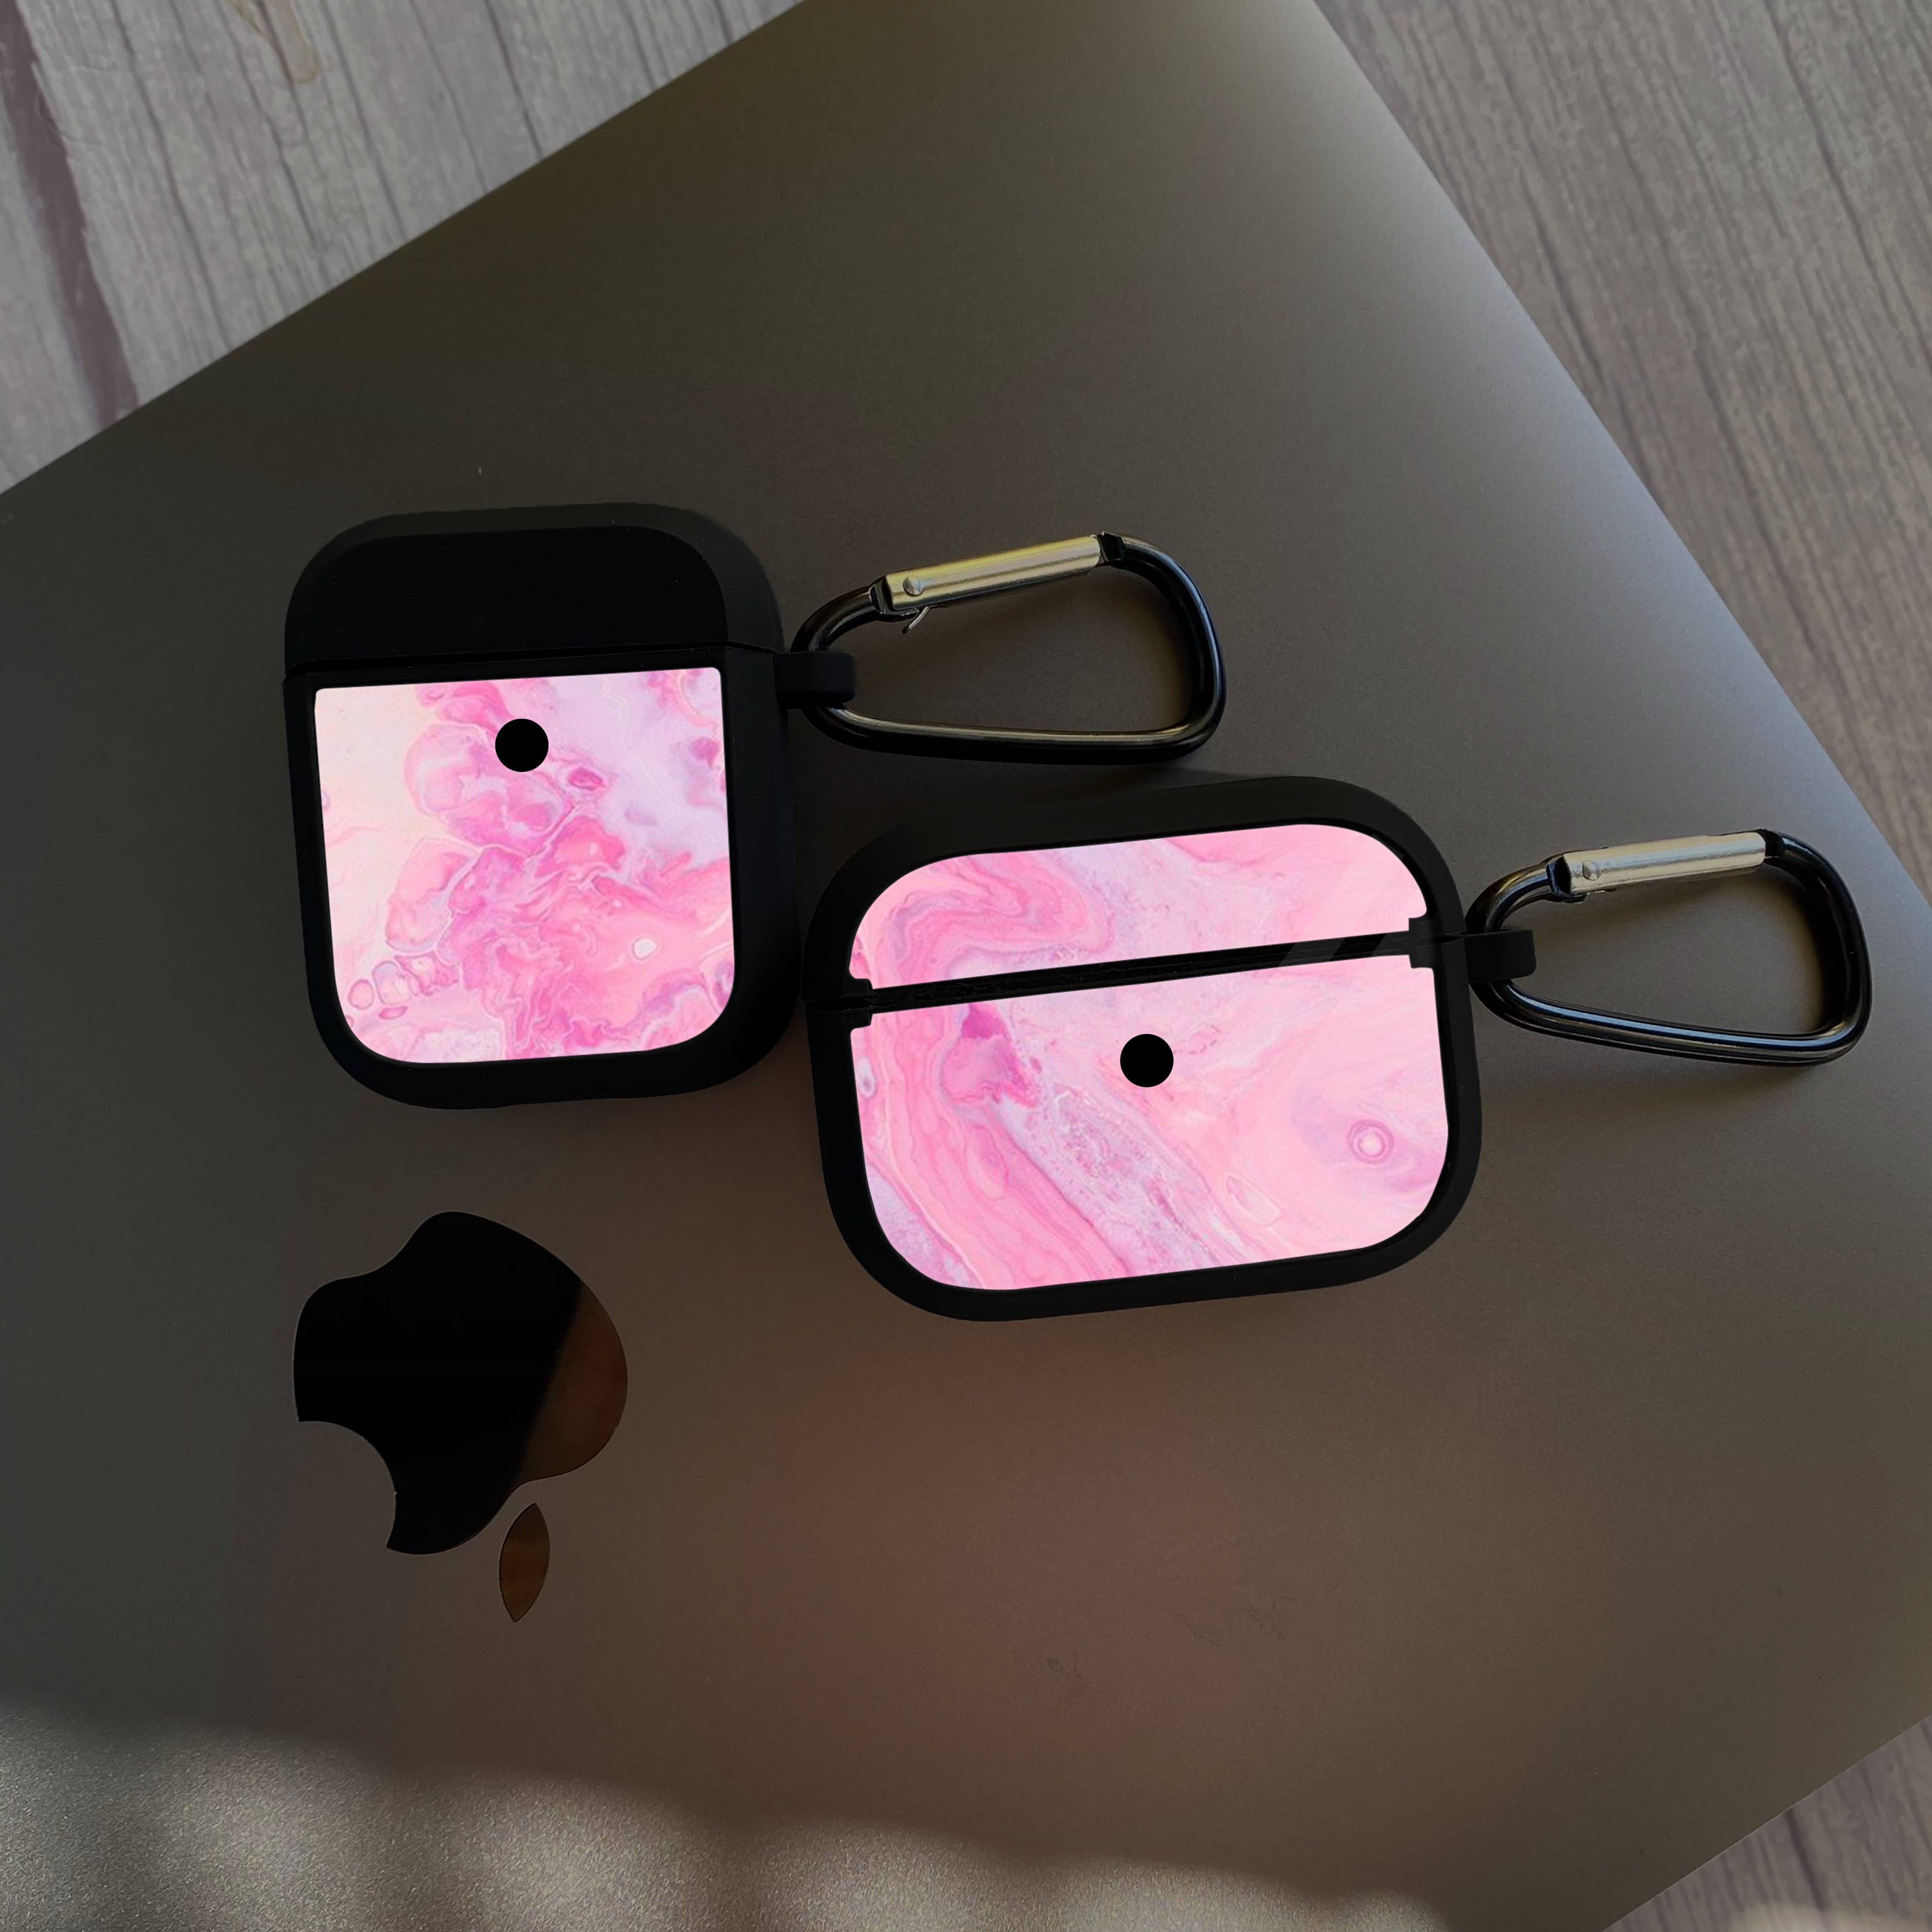 Apple Airpods Case - Pink Marble Series 06 - Premium Print with holding clip